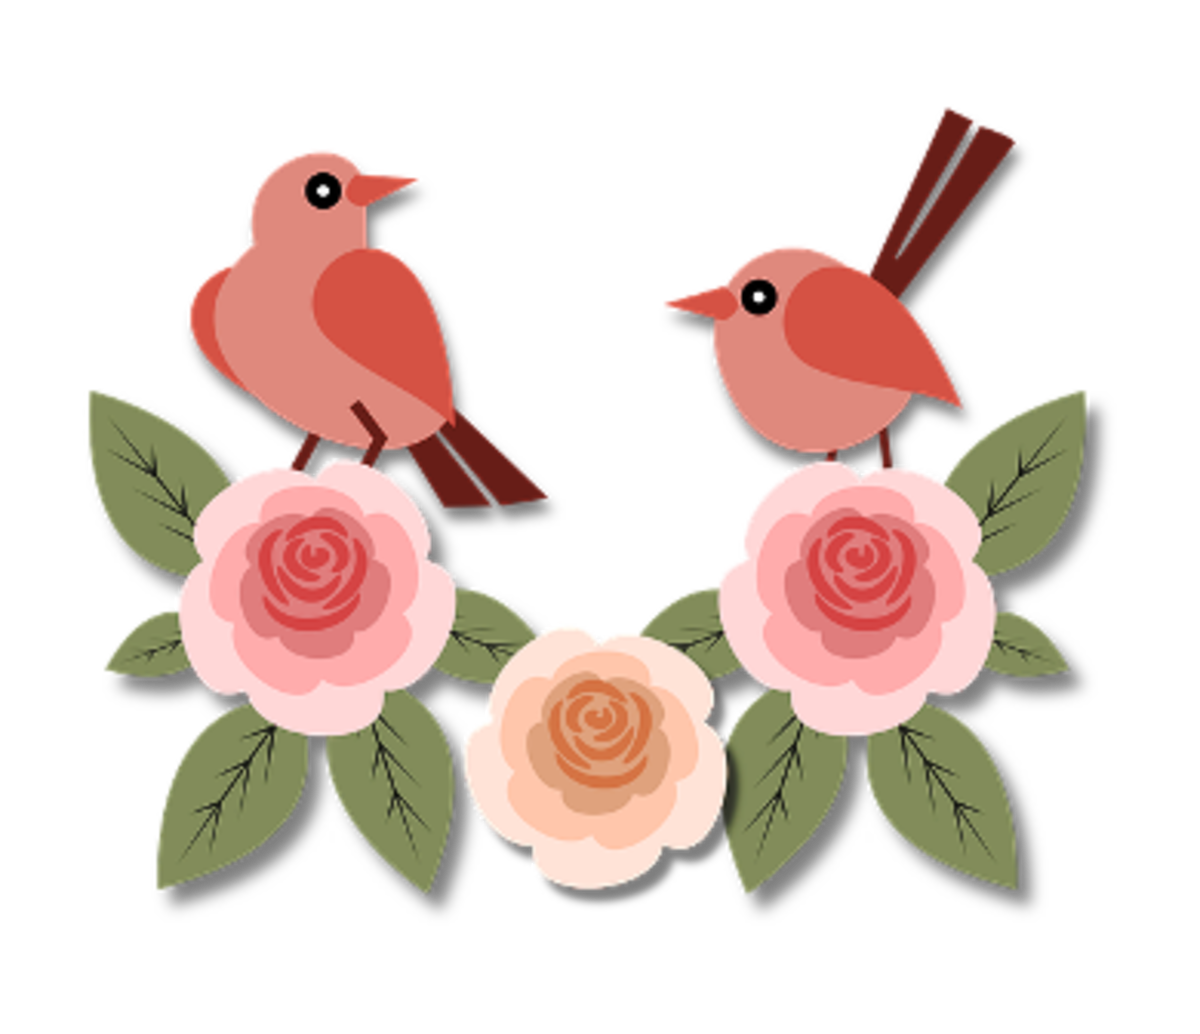 Sweet birds add charm perched on top of roses.